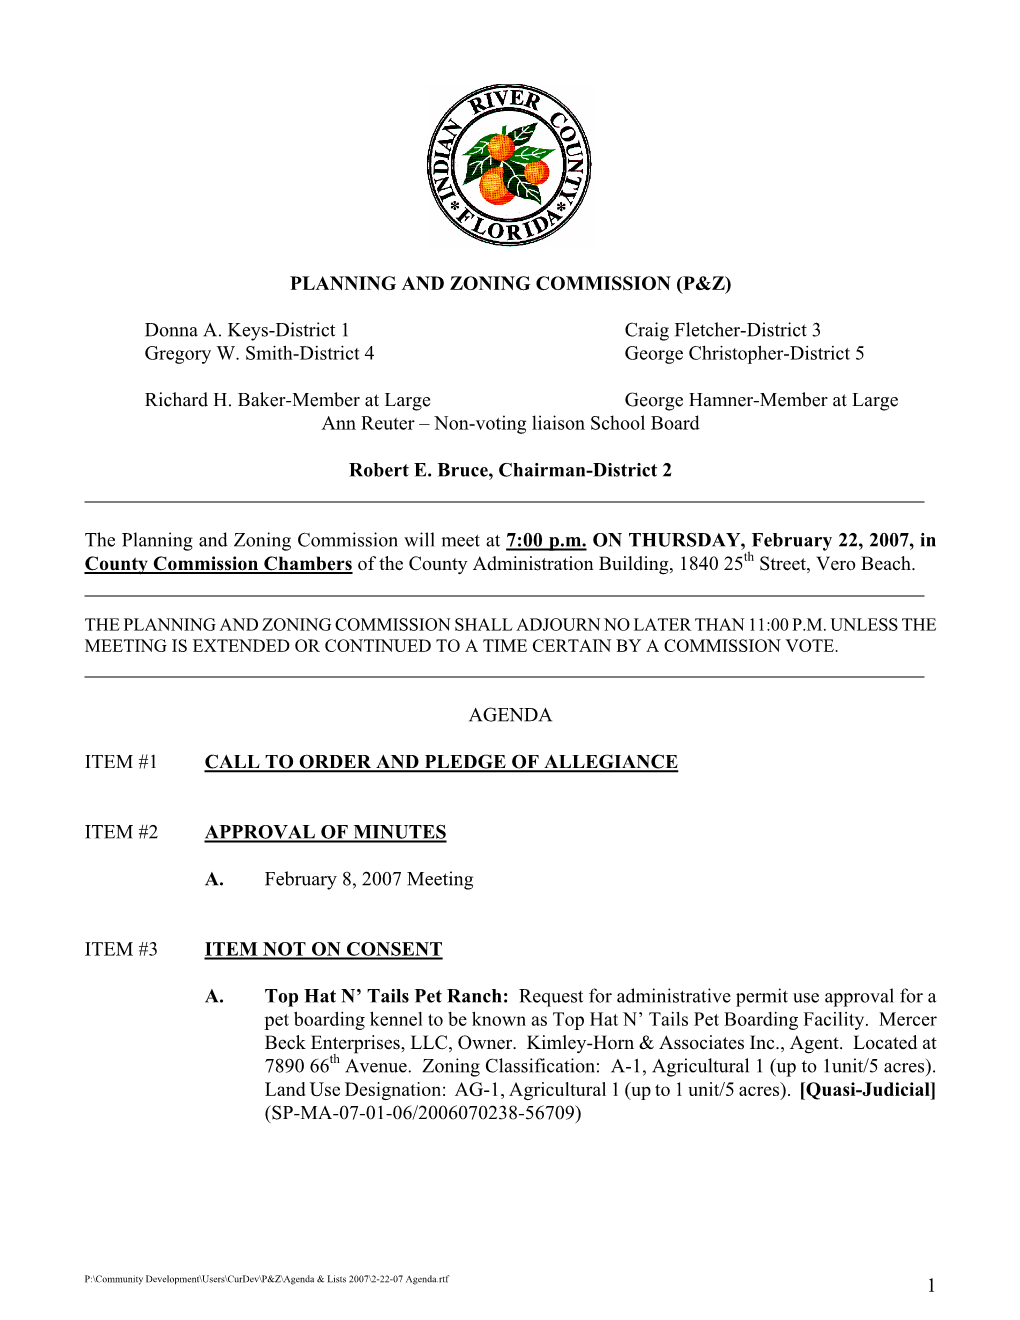 Planning and Zoning Commission Meeting Agenda 02/22/07